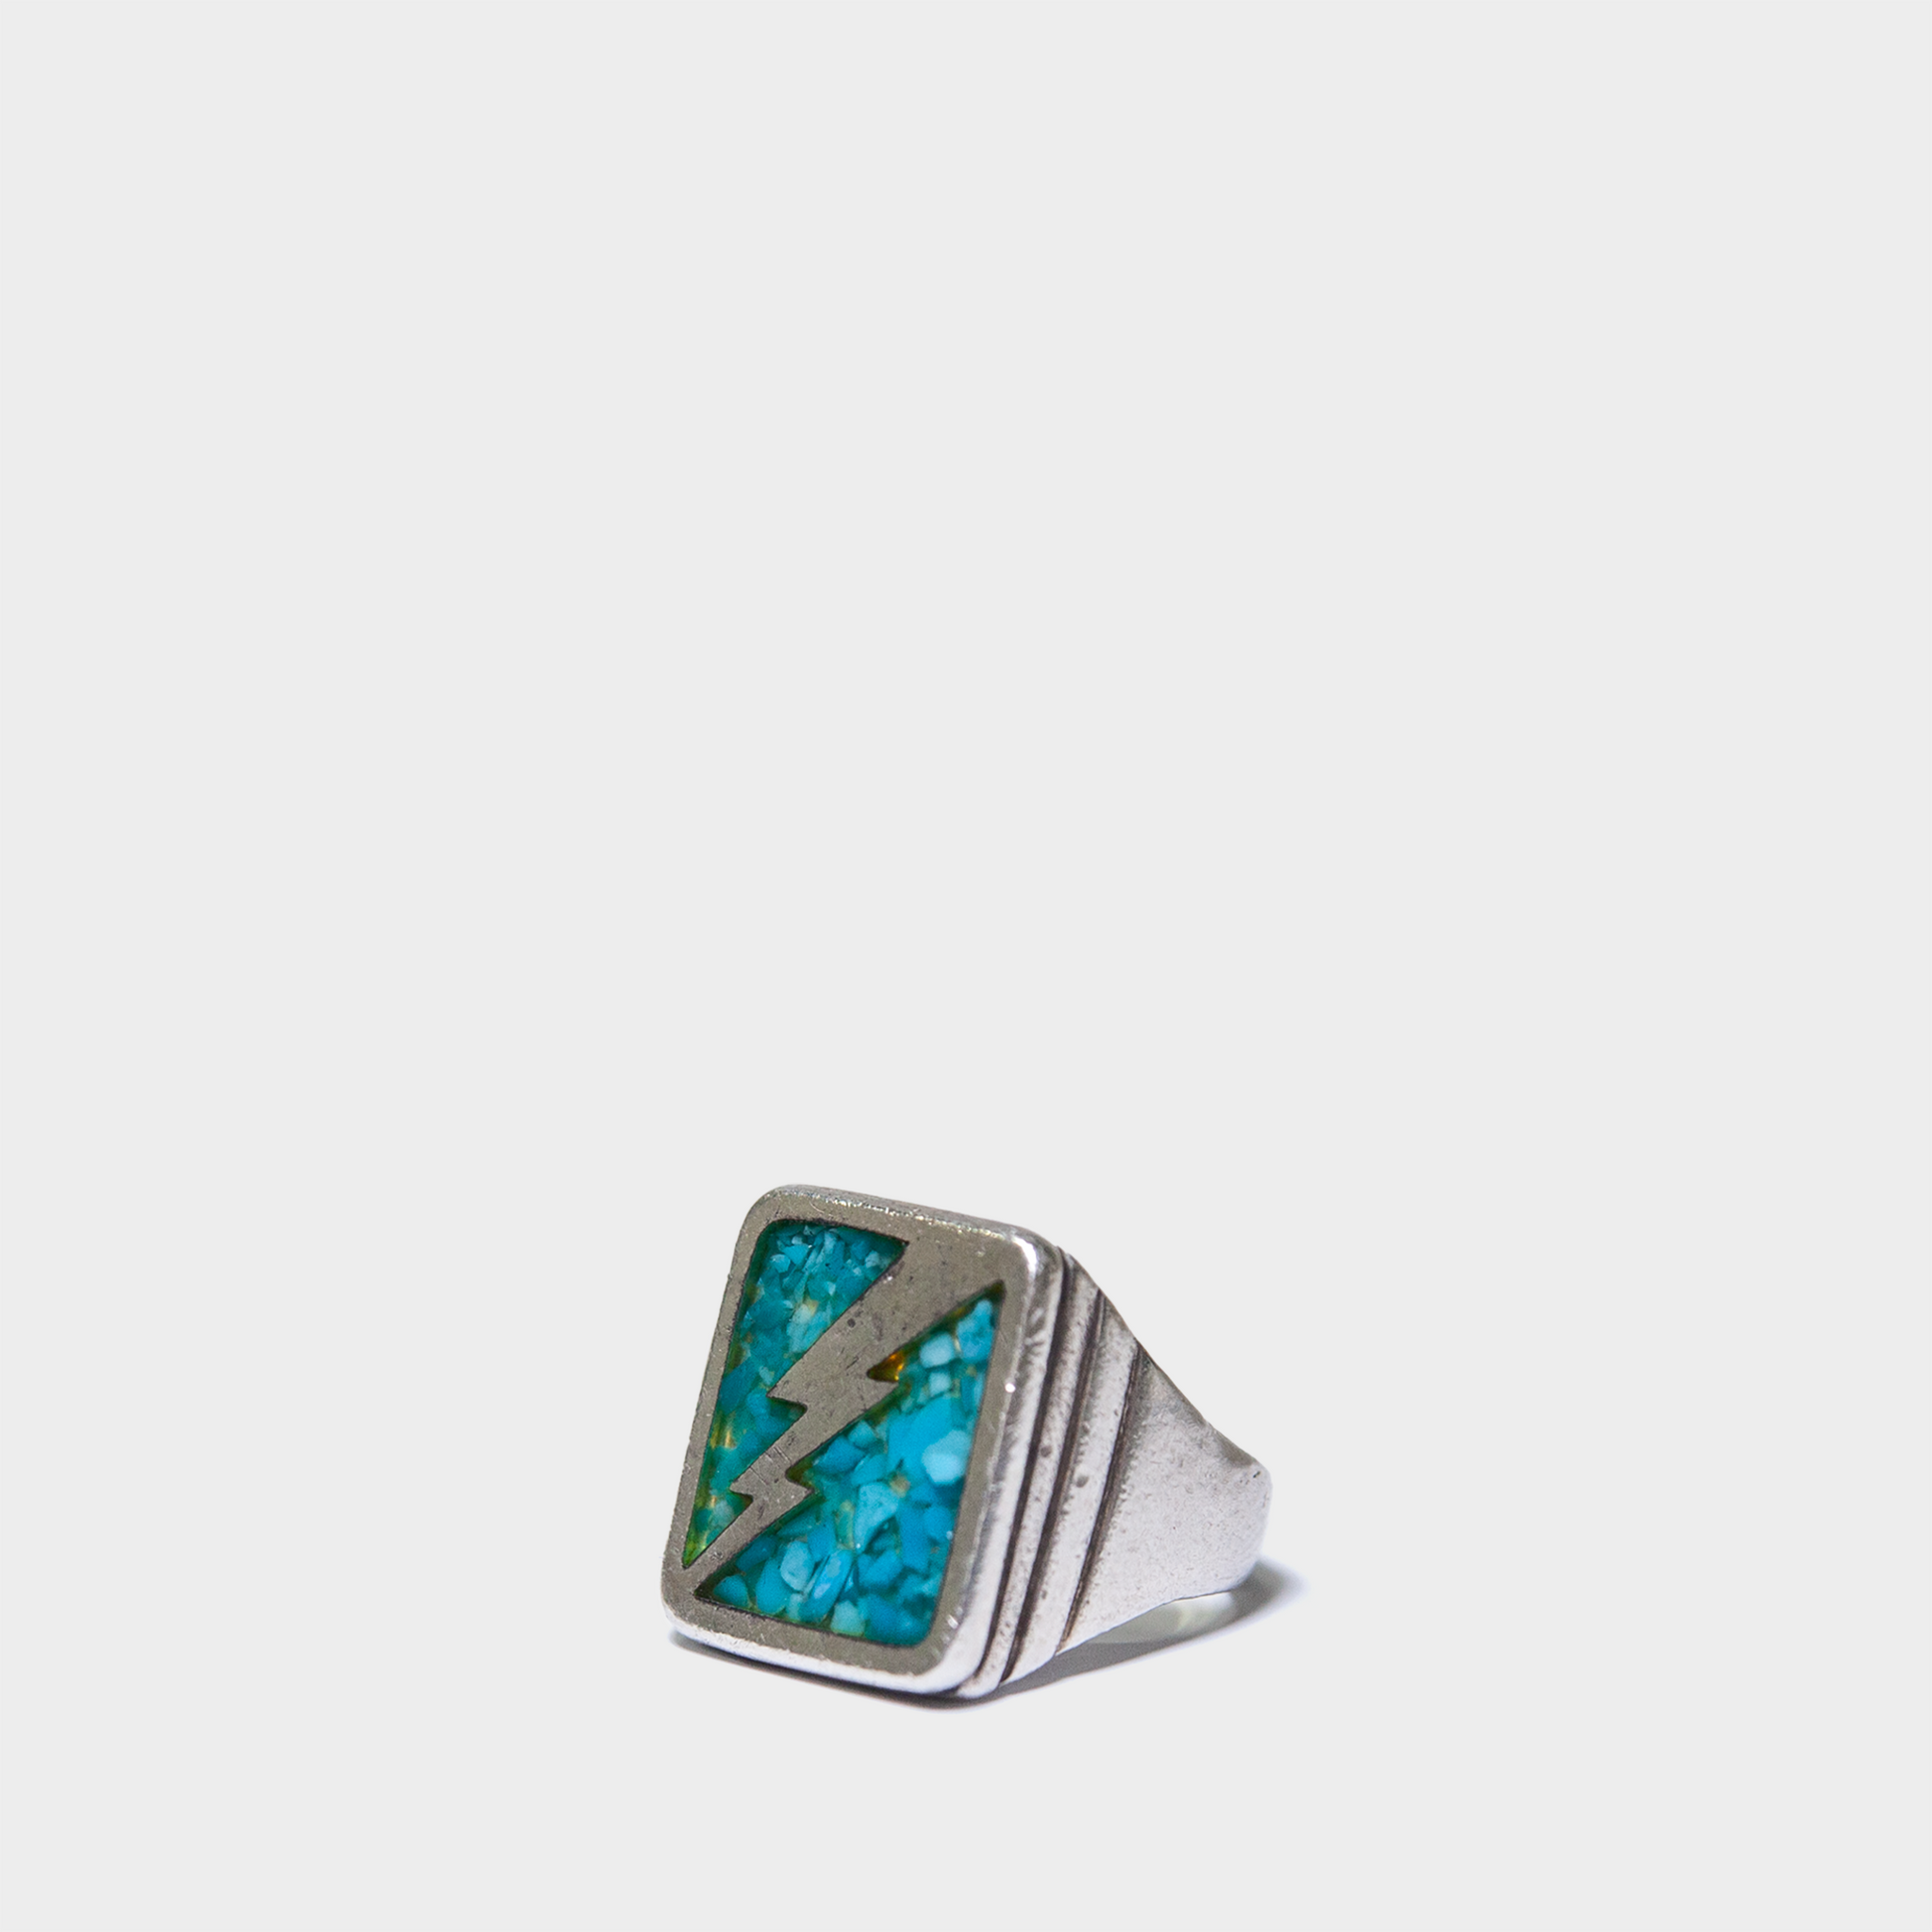 TADY & KING THUNDER WITH TURQUOISE RING [USED]